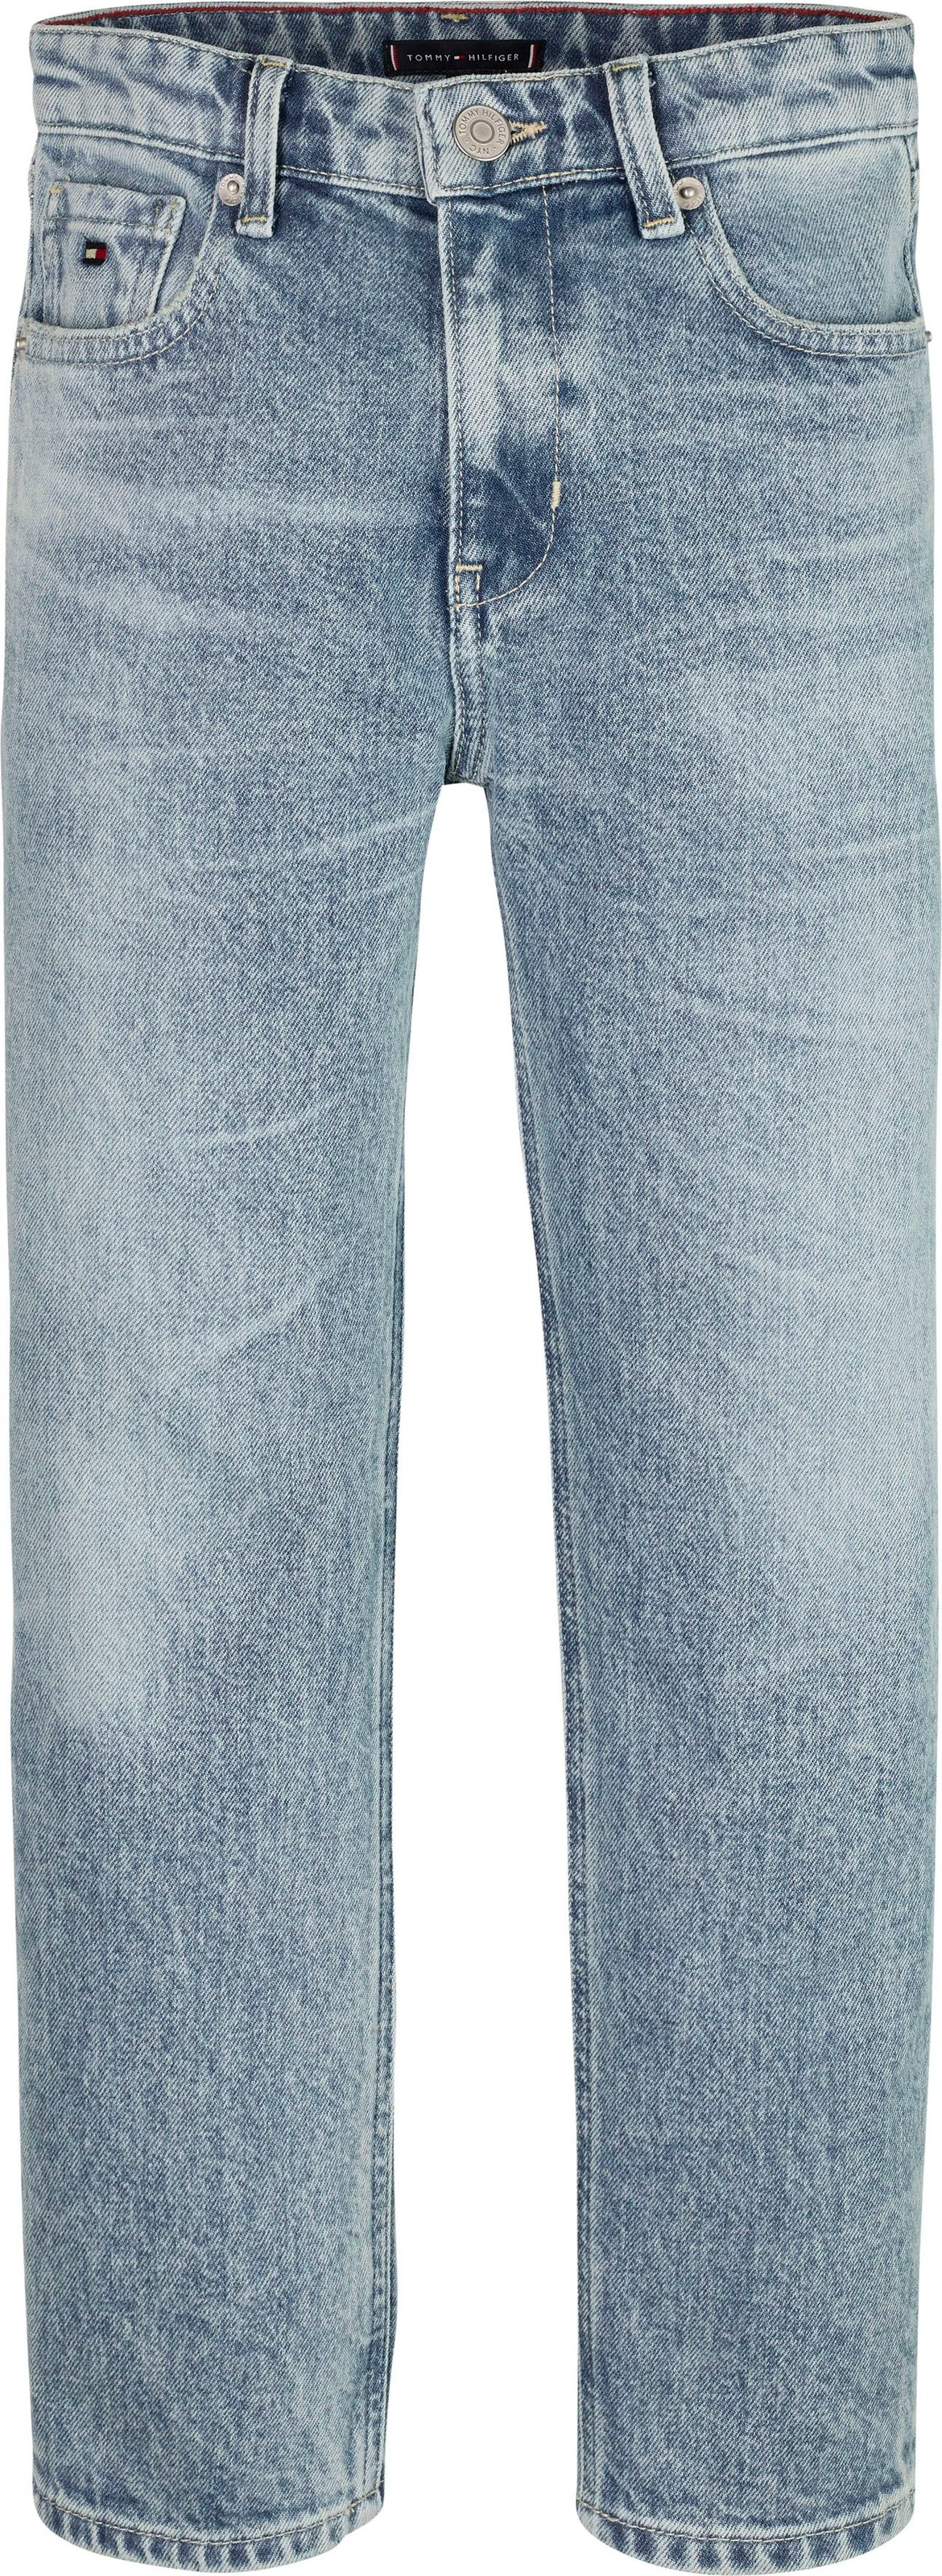 Tommy Hilfiger »SKATER kaufen JEAN im Bequeme RECYCLED«, Jeans 5-Pocket-Style